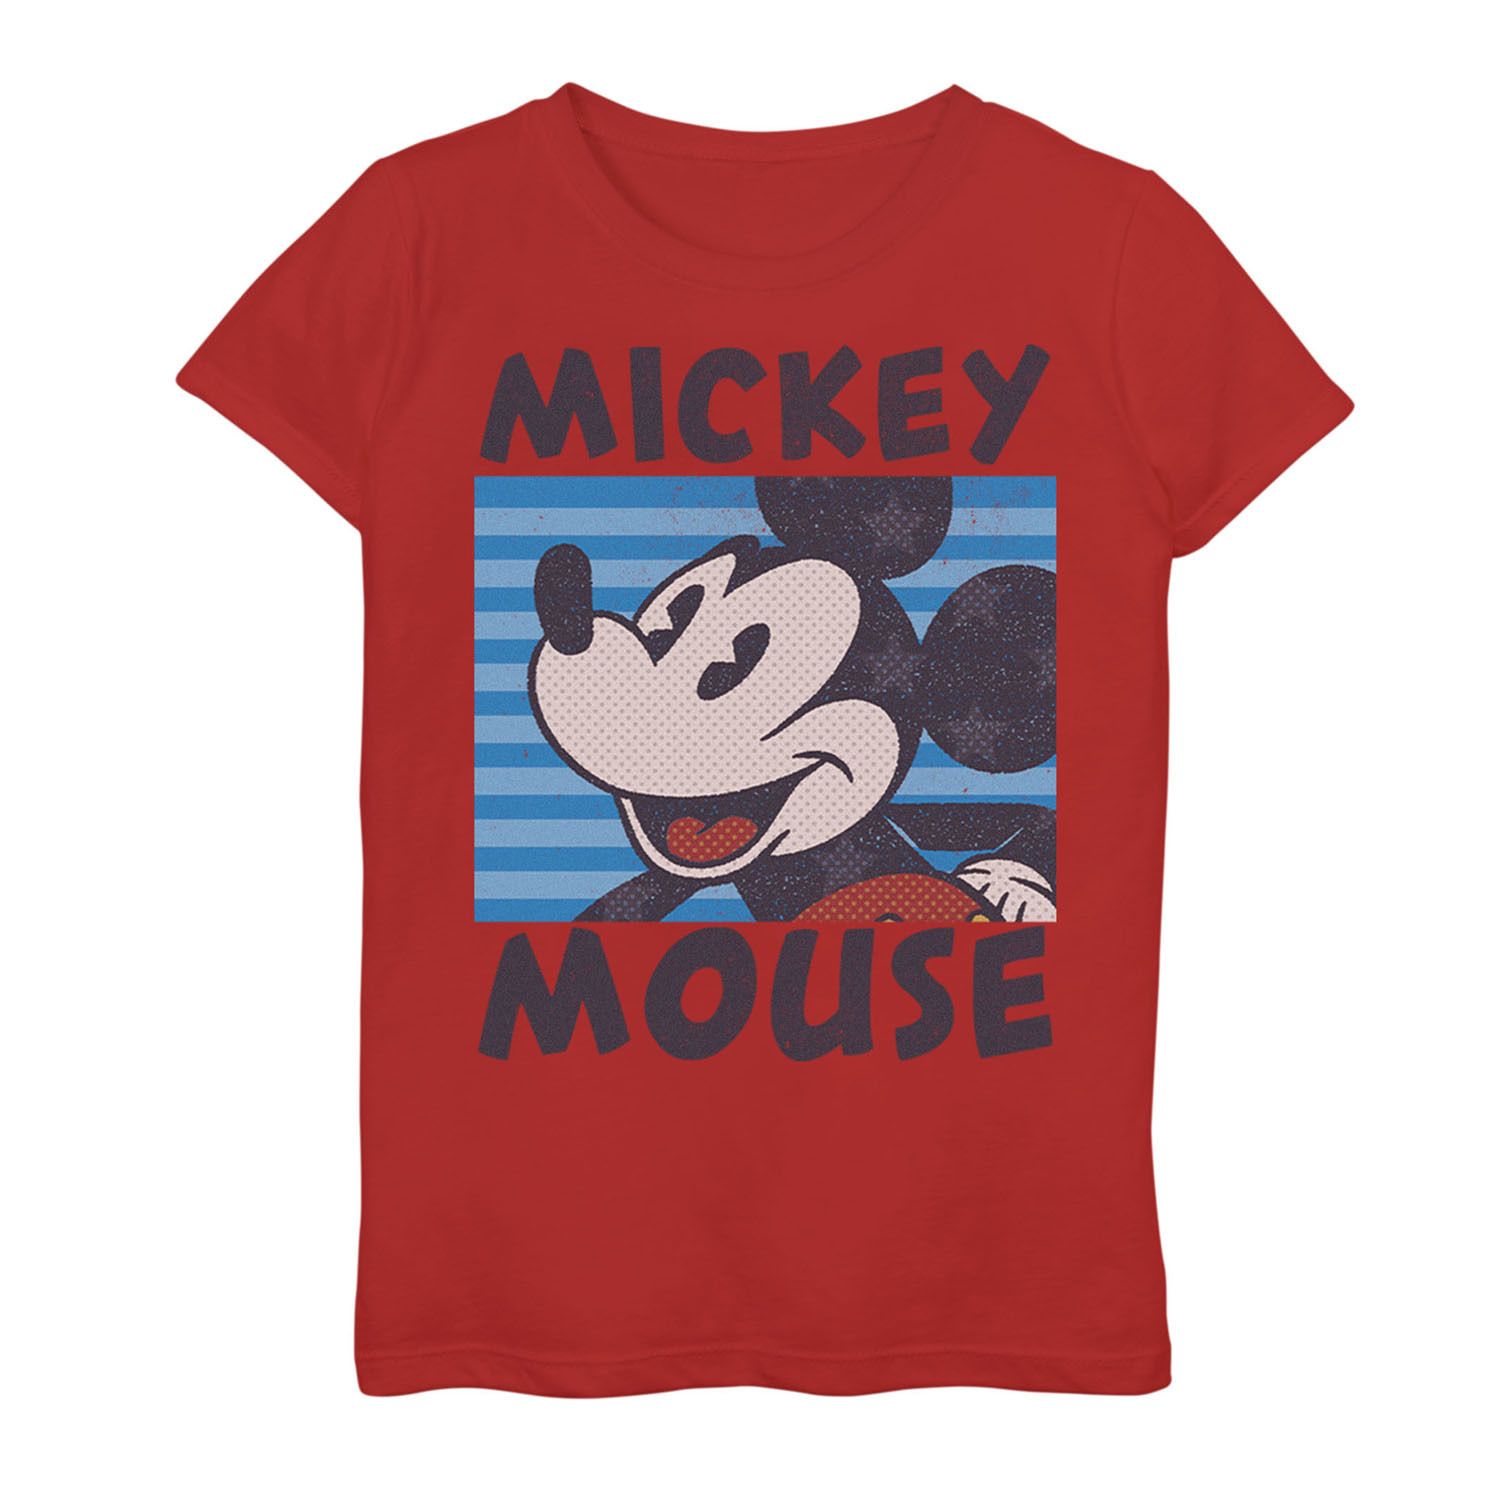 Image for Disney 's Mickey Mouse Girls 7-16 Comic Portrait Graphic Tee at Kohl's.